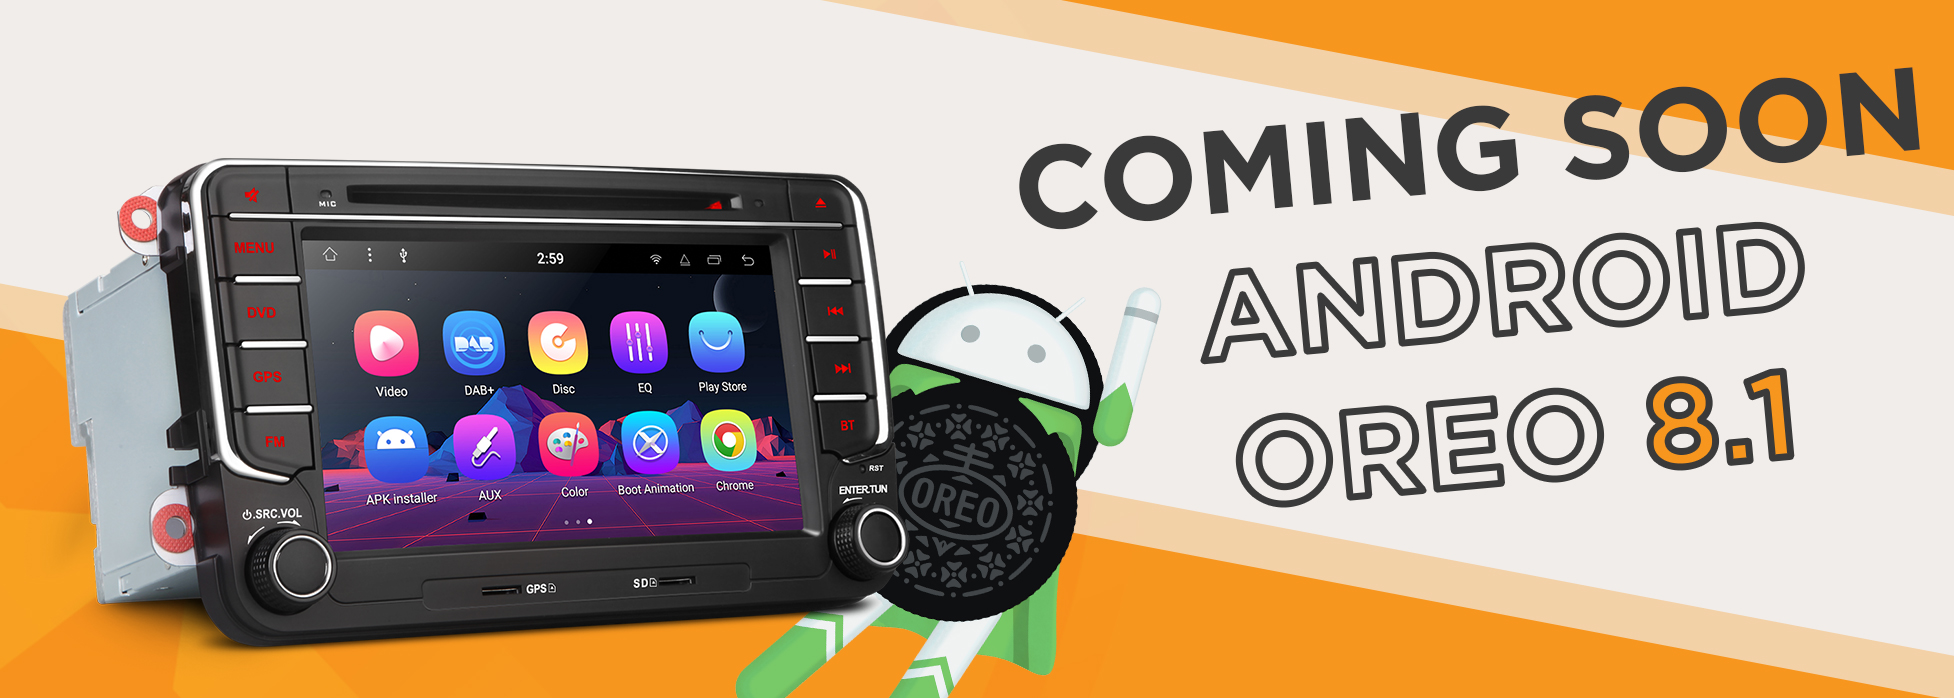 Android-8-1-COMING-SOON-web-banner